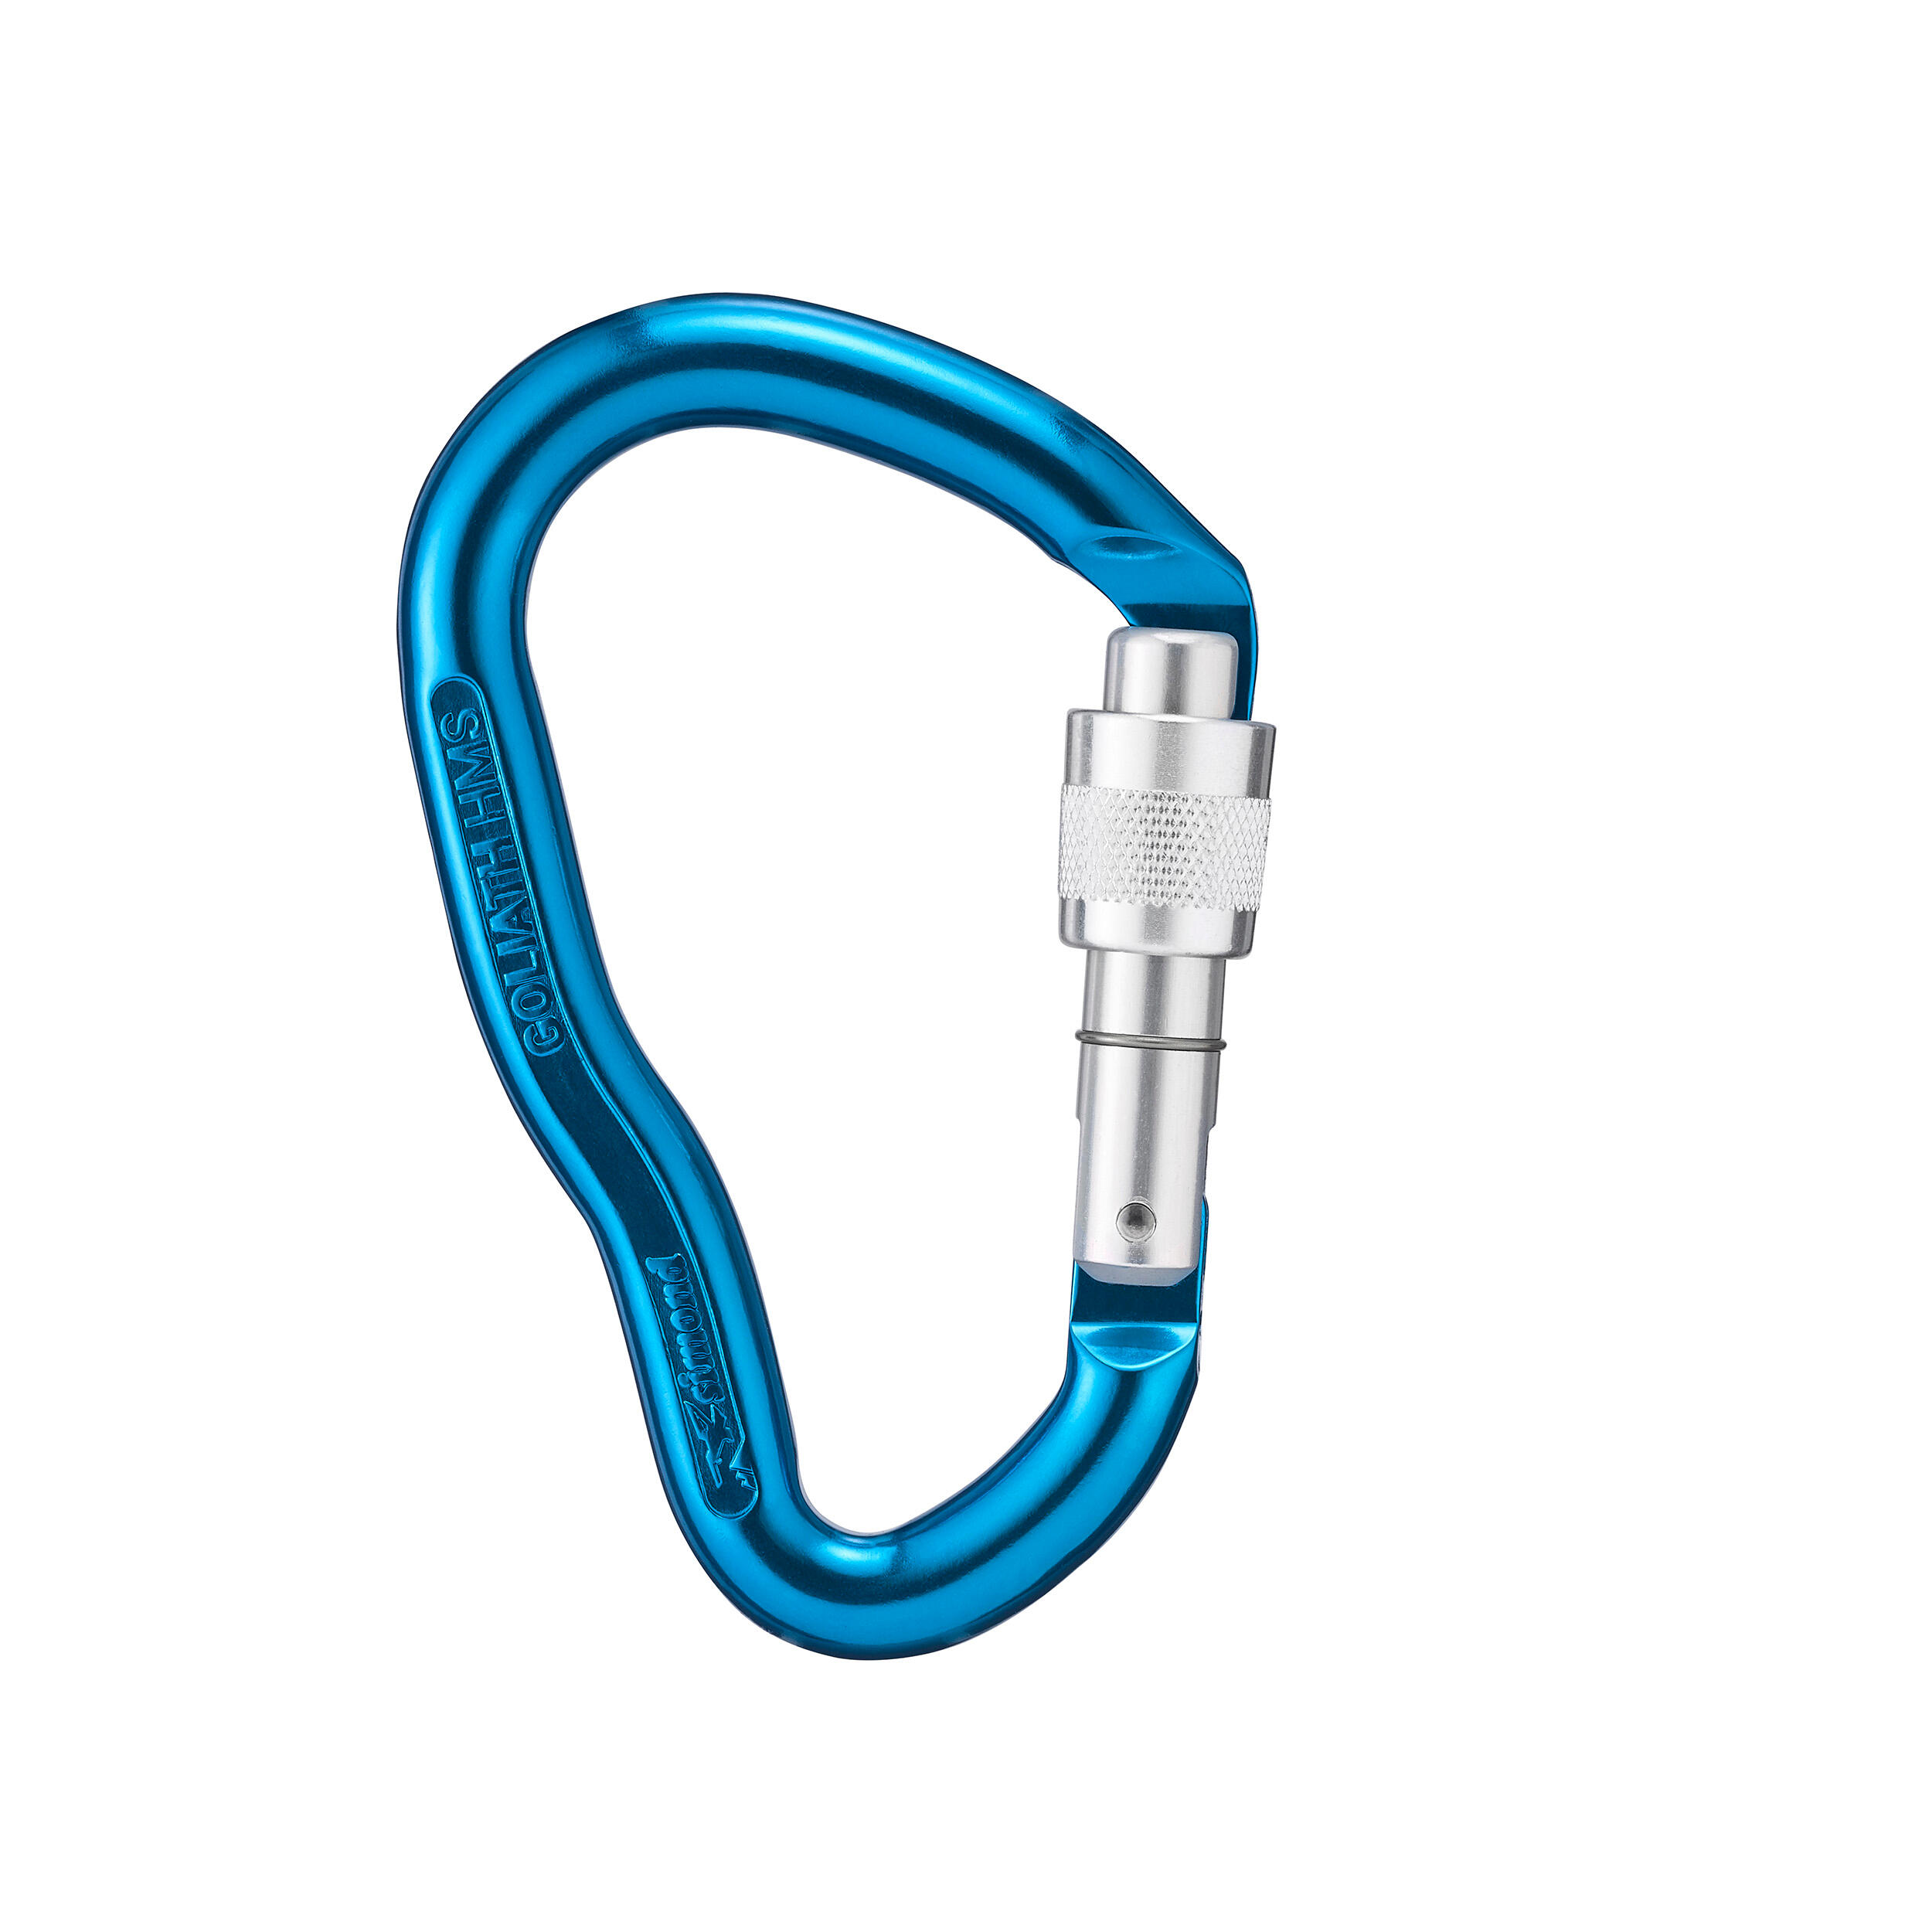 HMS MOUNTAINEERING AND CLIMBING SCREWGATE CARABINER GOLIATH SECURE - BLUE 6/6